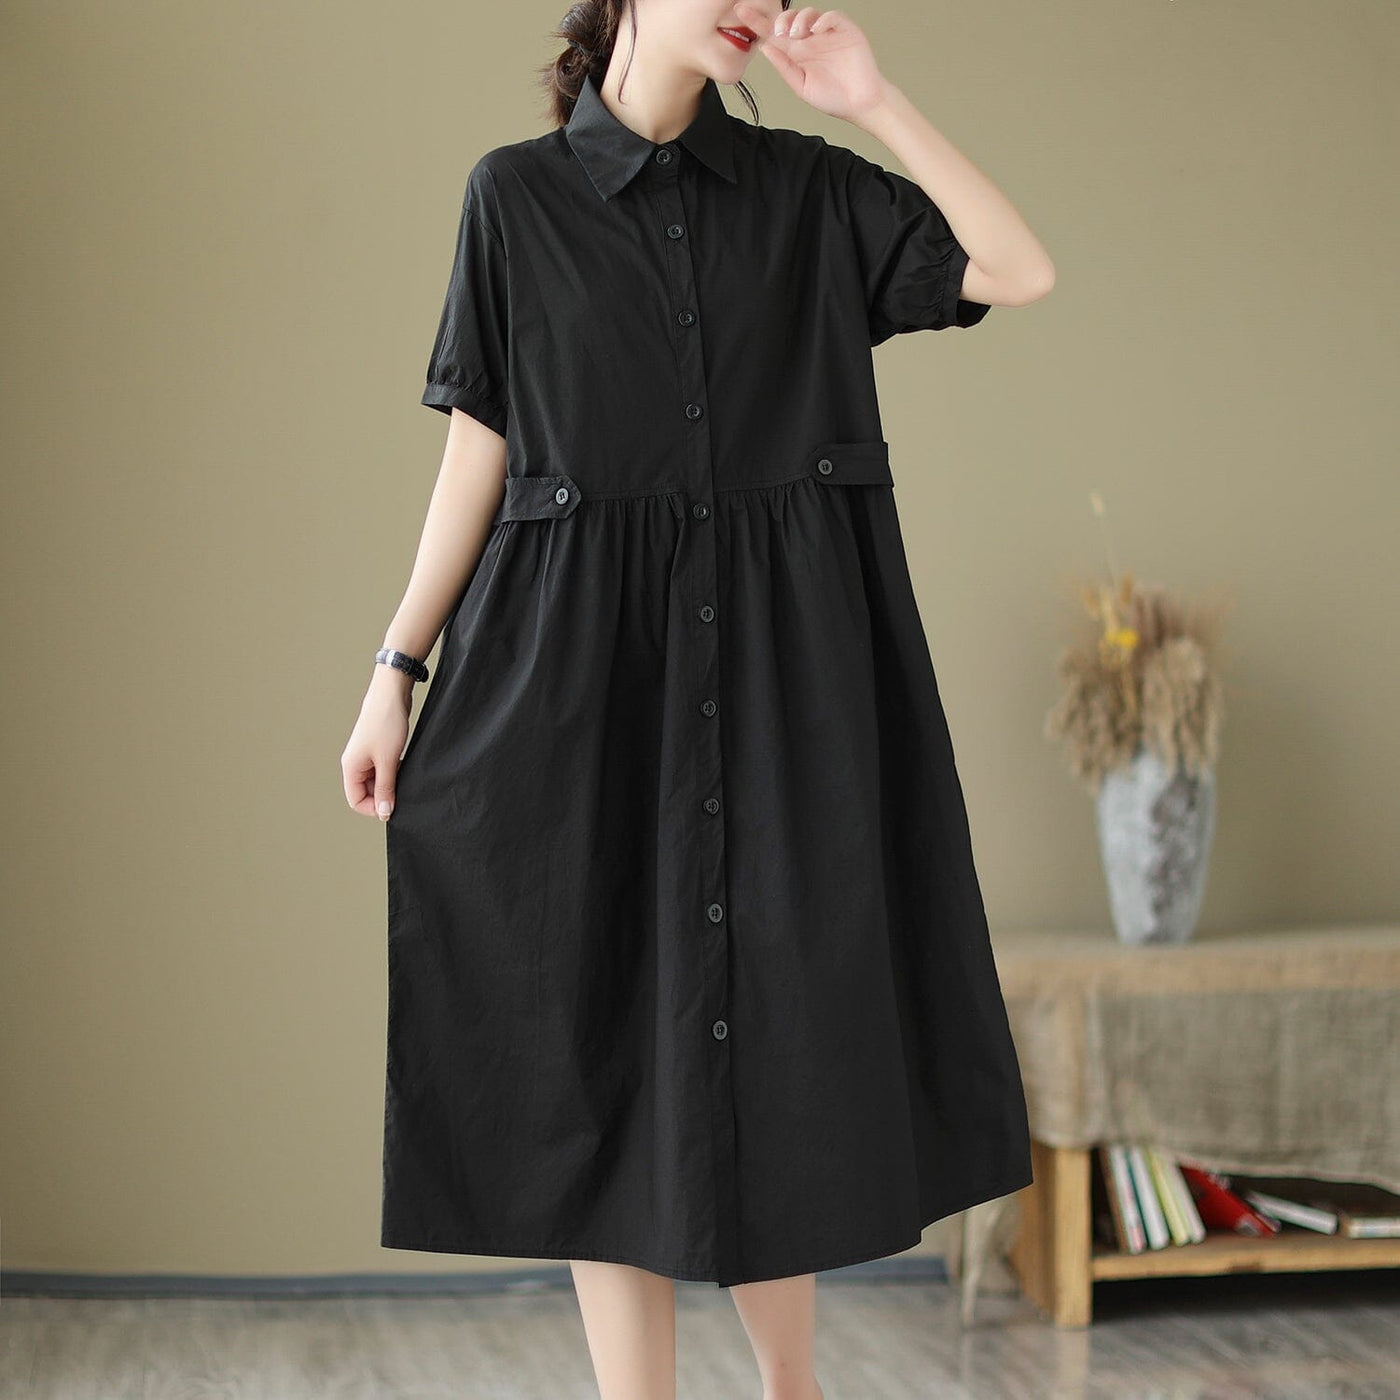 Summer Casual Solid Loose A-Line Dress